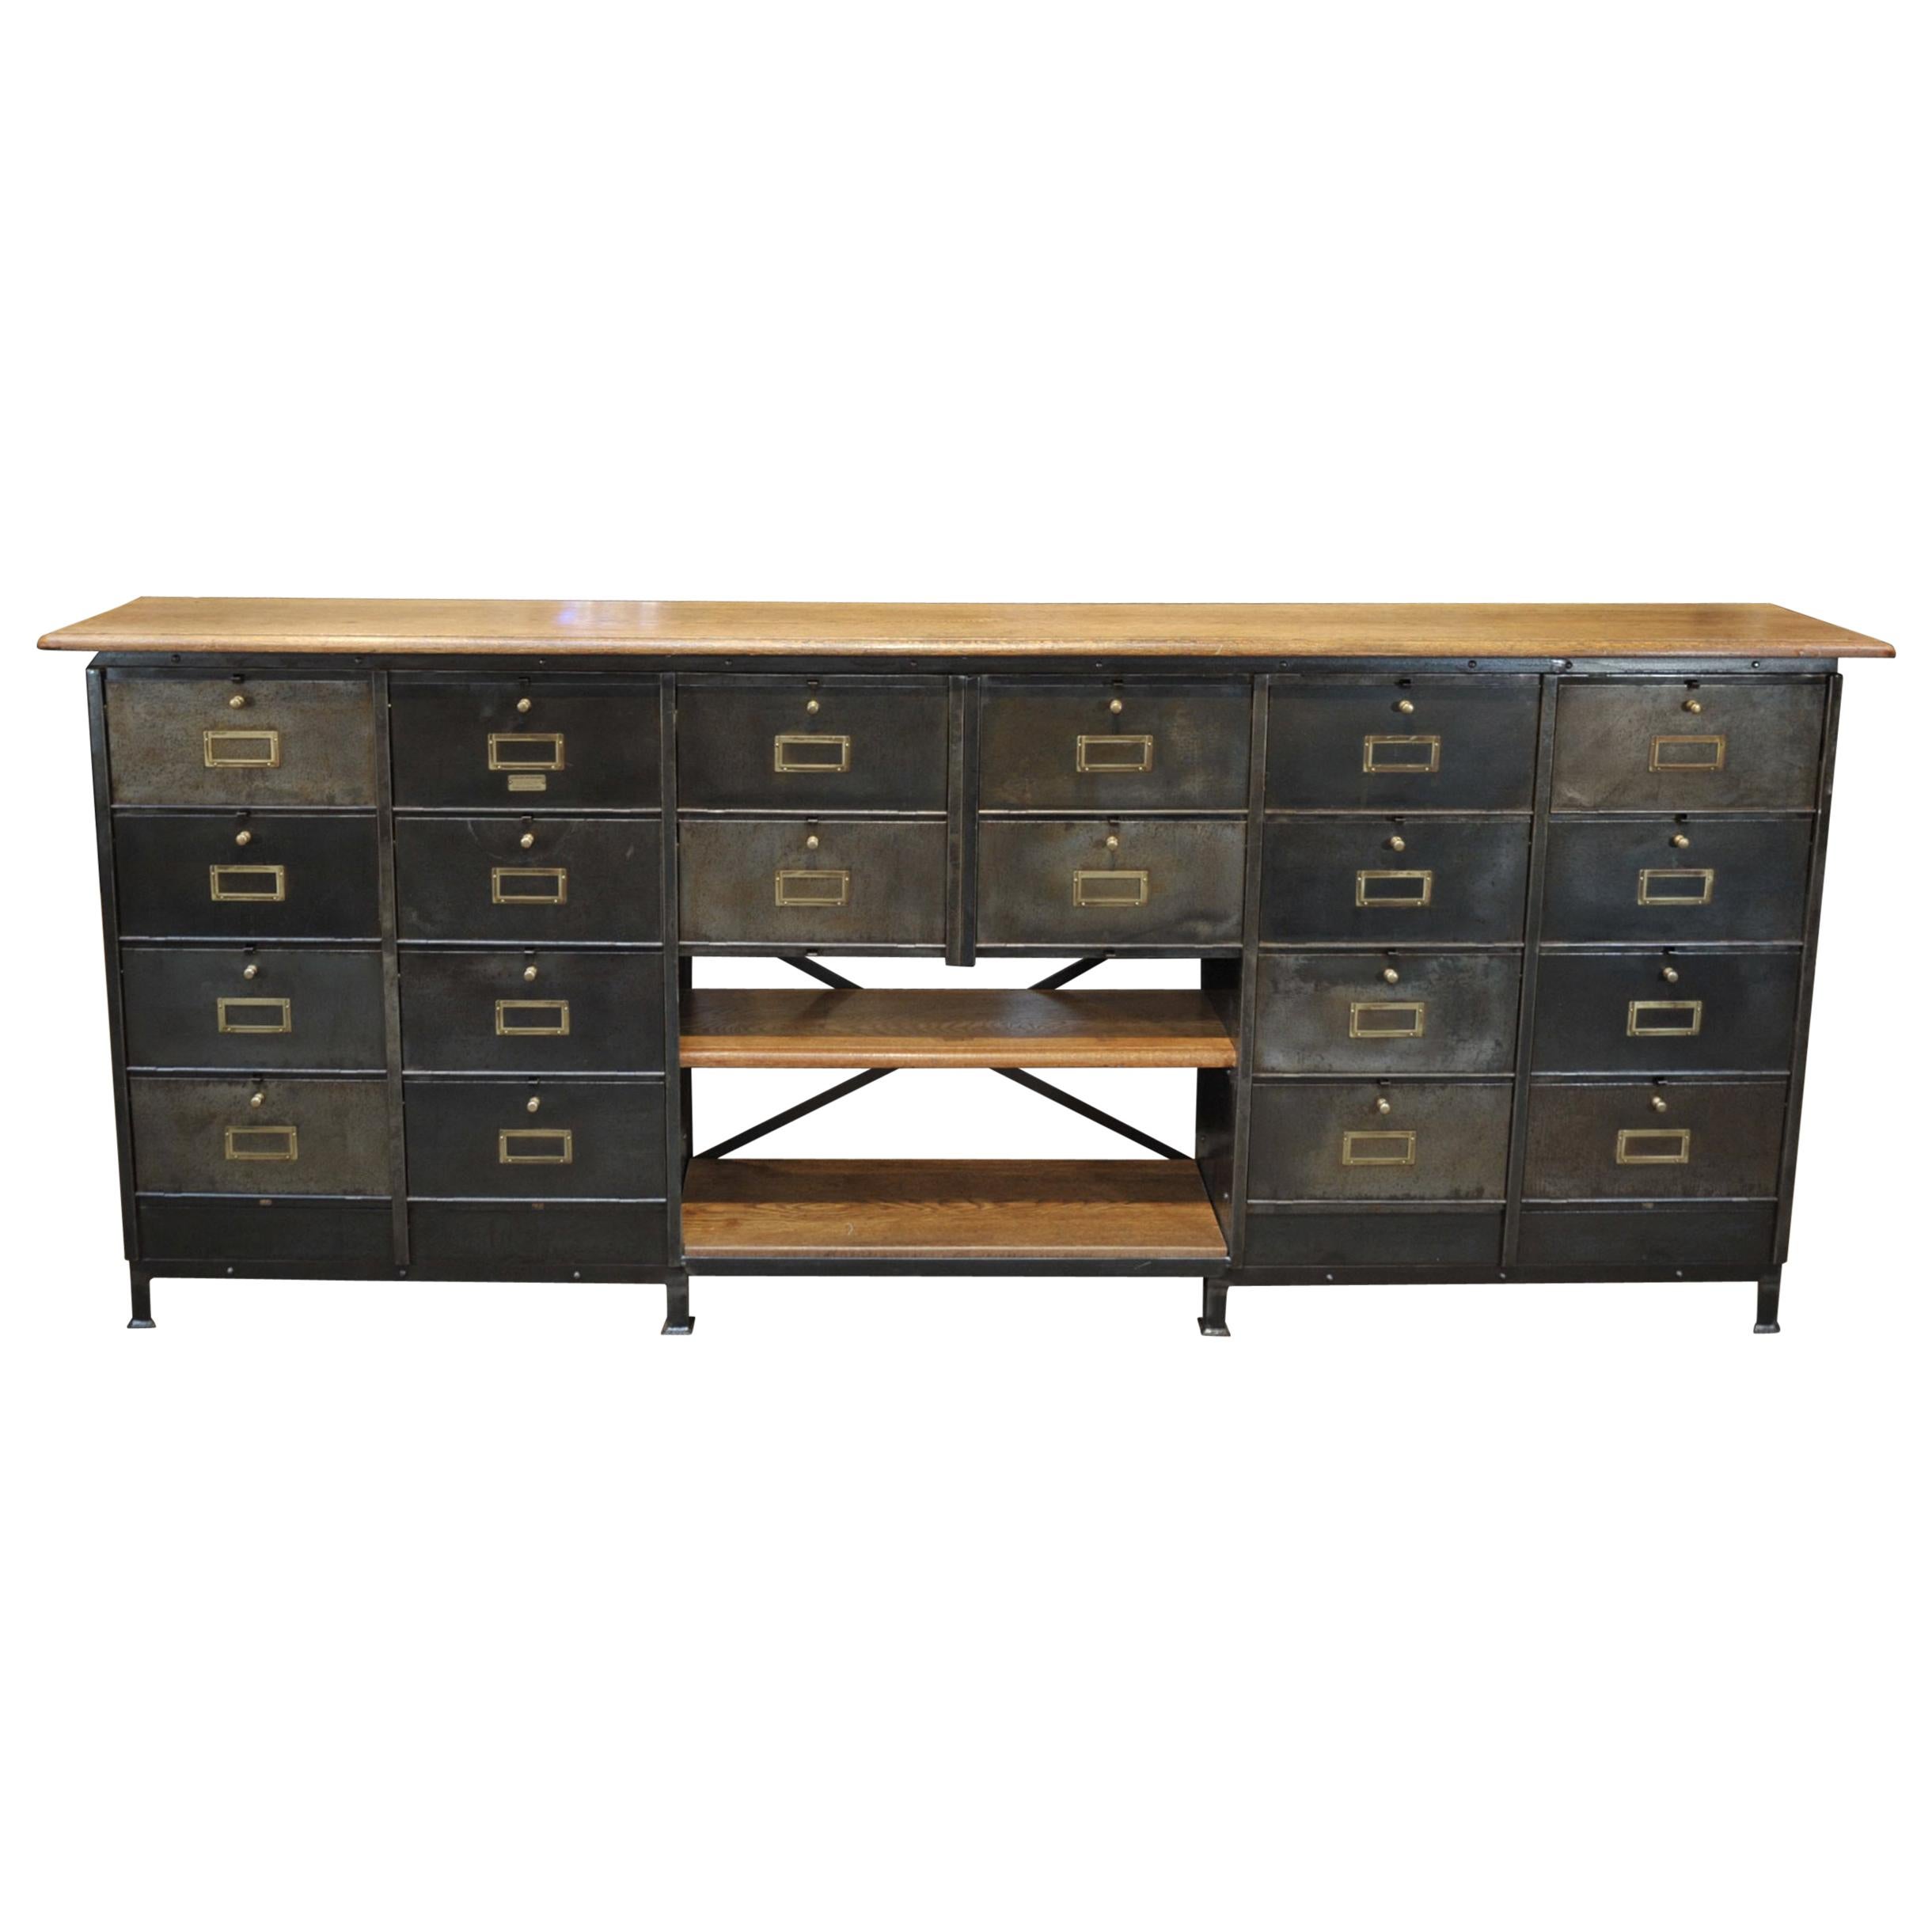 Long Ronéo Paris Iron and Oak Industrial Capets Cabinet, circa 1950 For Sale